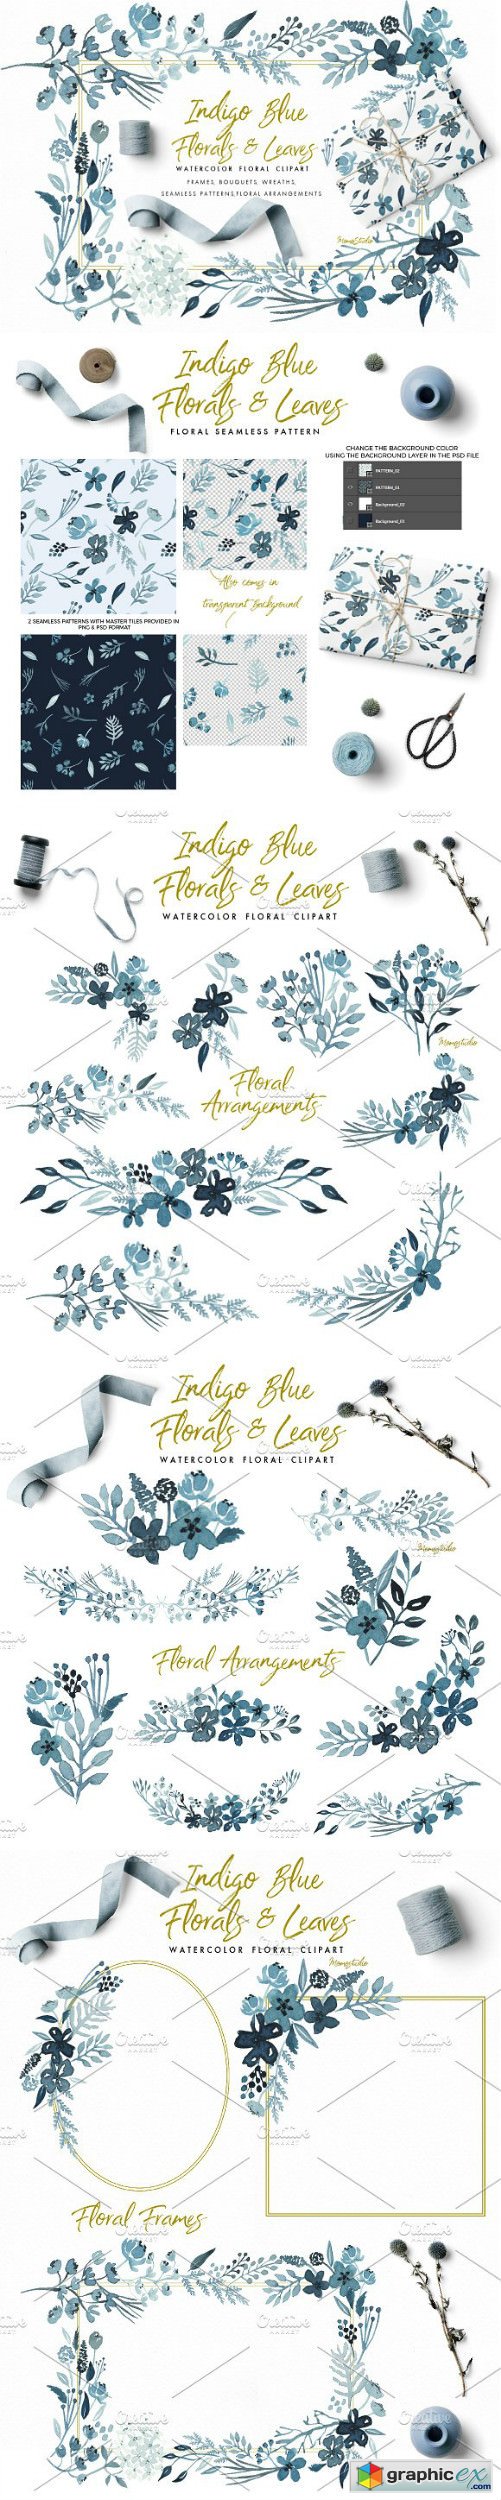 Indigo Blue Florals and Leaves